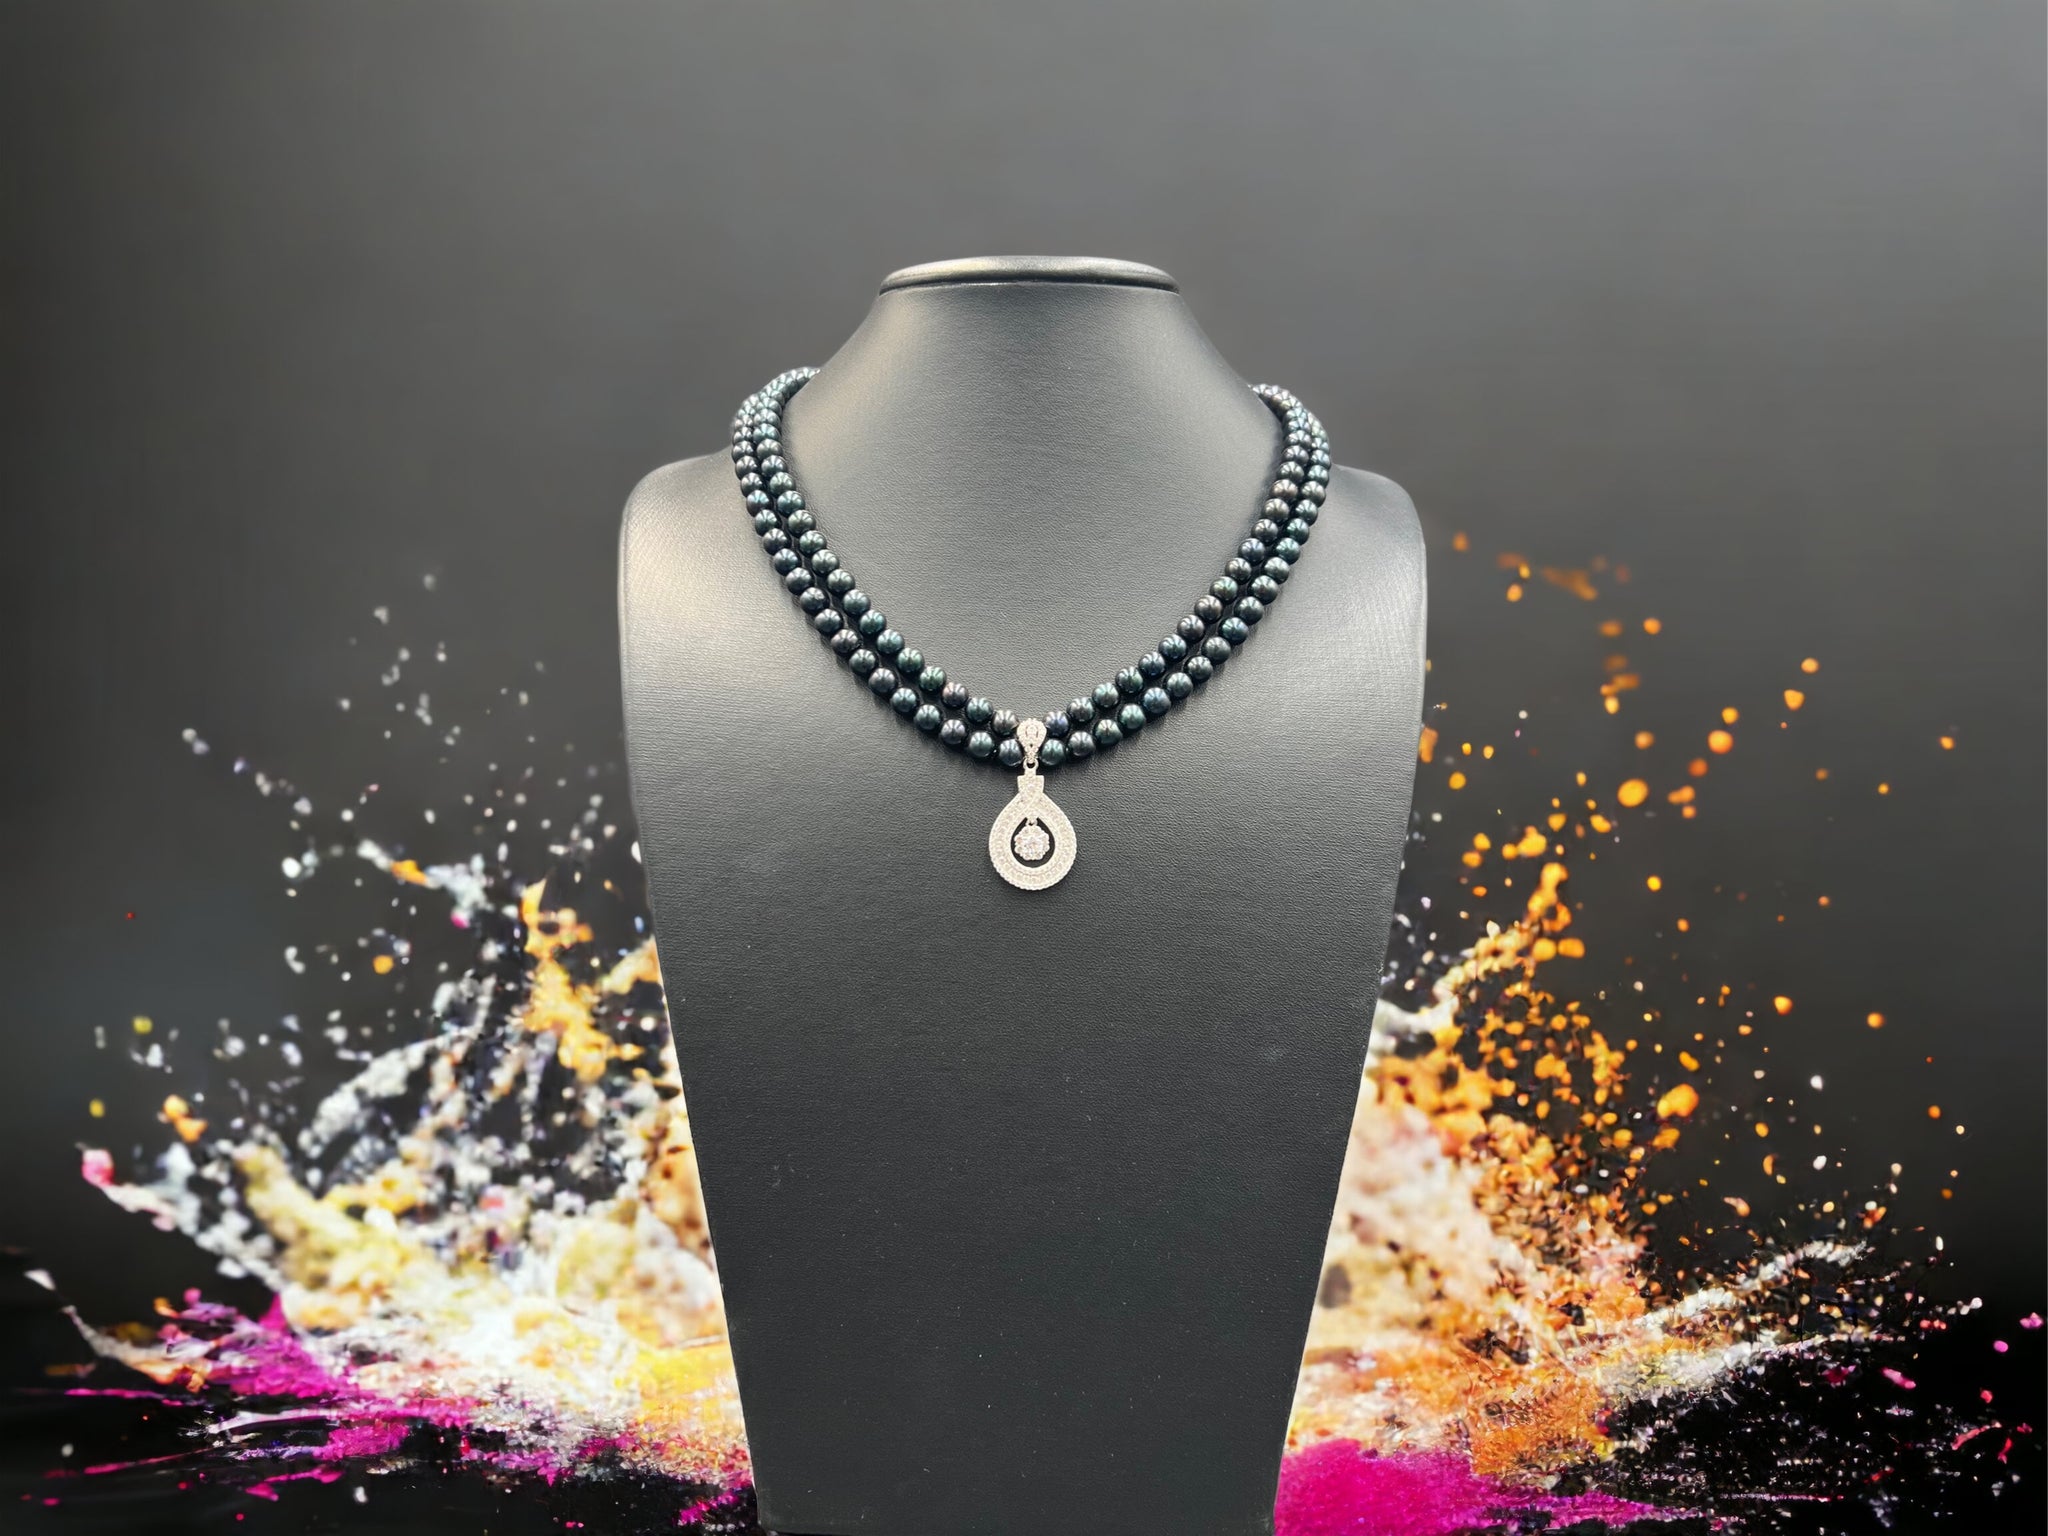 Double Black Pearl Necklace